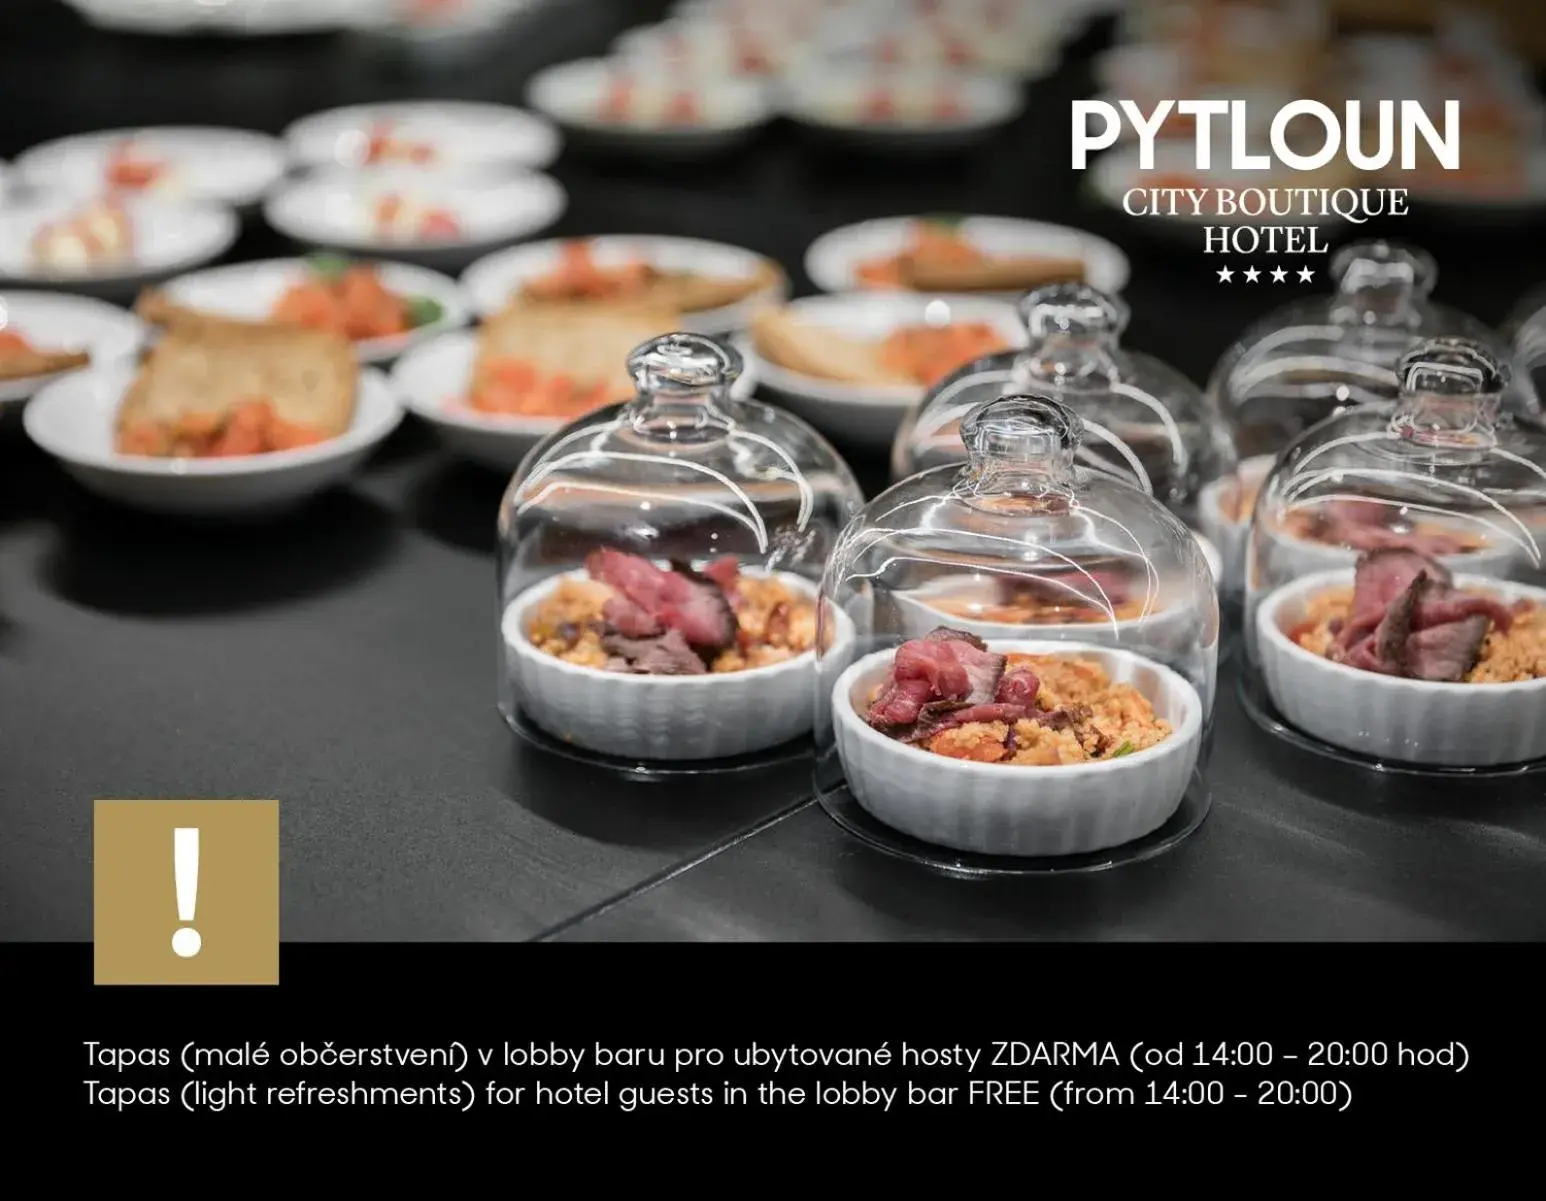 Food in Pytloun City Boutique Hotel